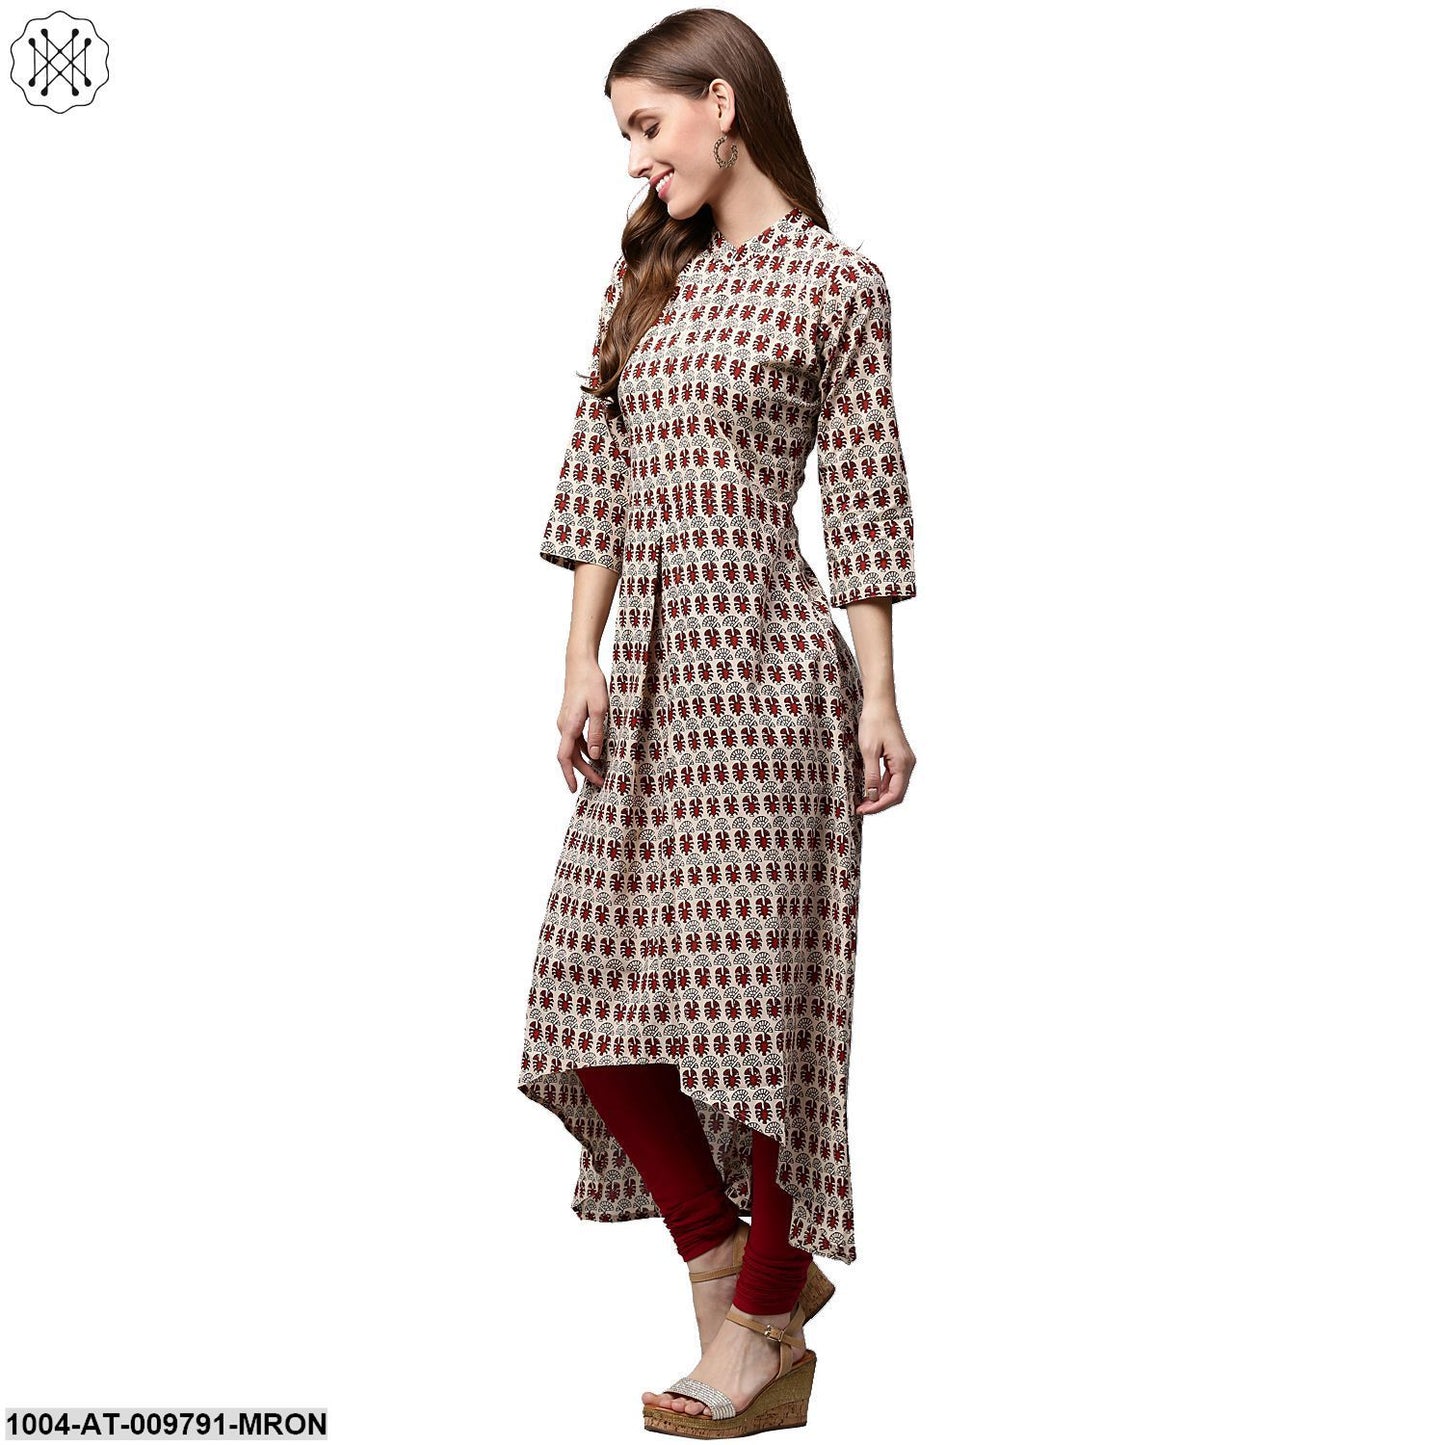 Off White And Maroon Printed 3/4Th Sleeve Cotton A-Line Kurta